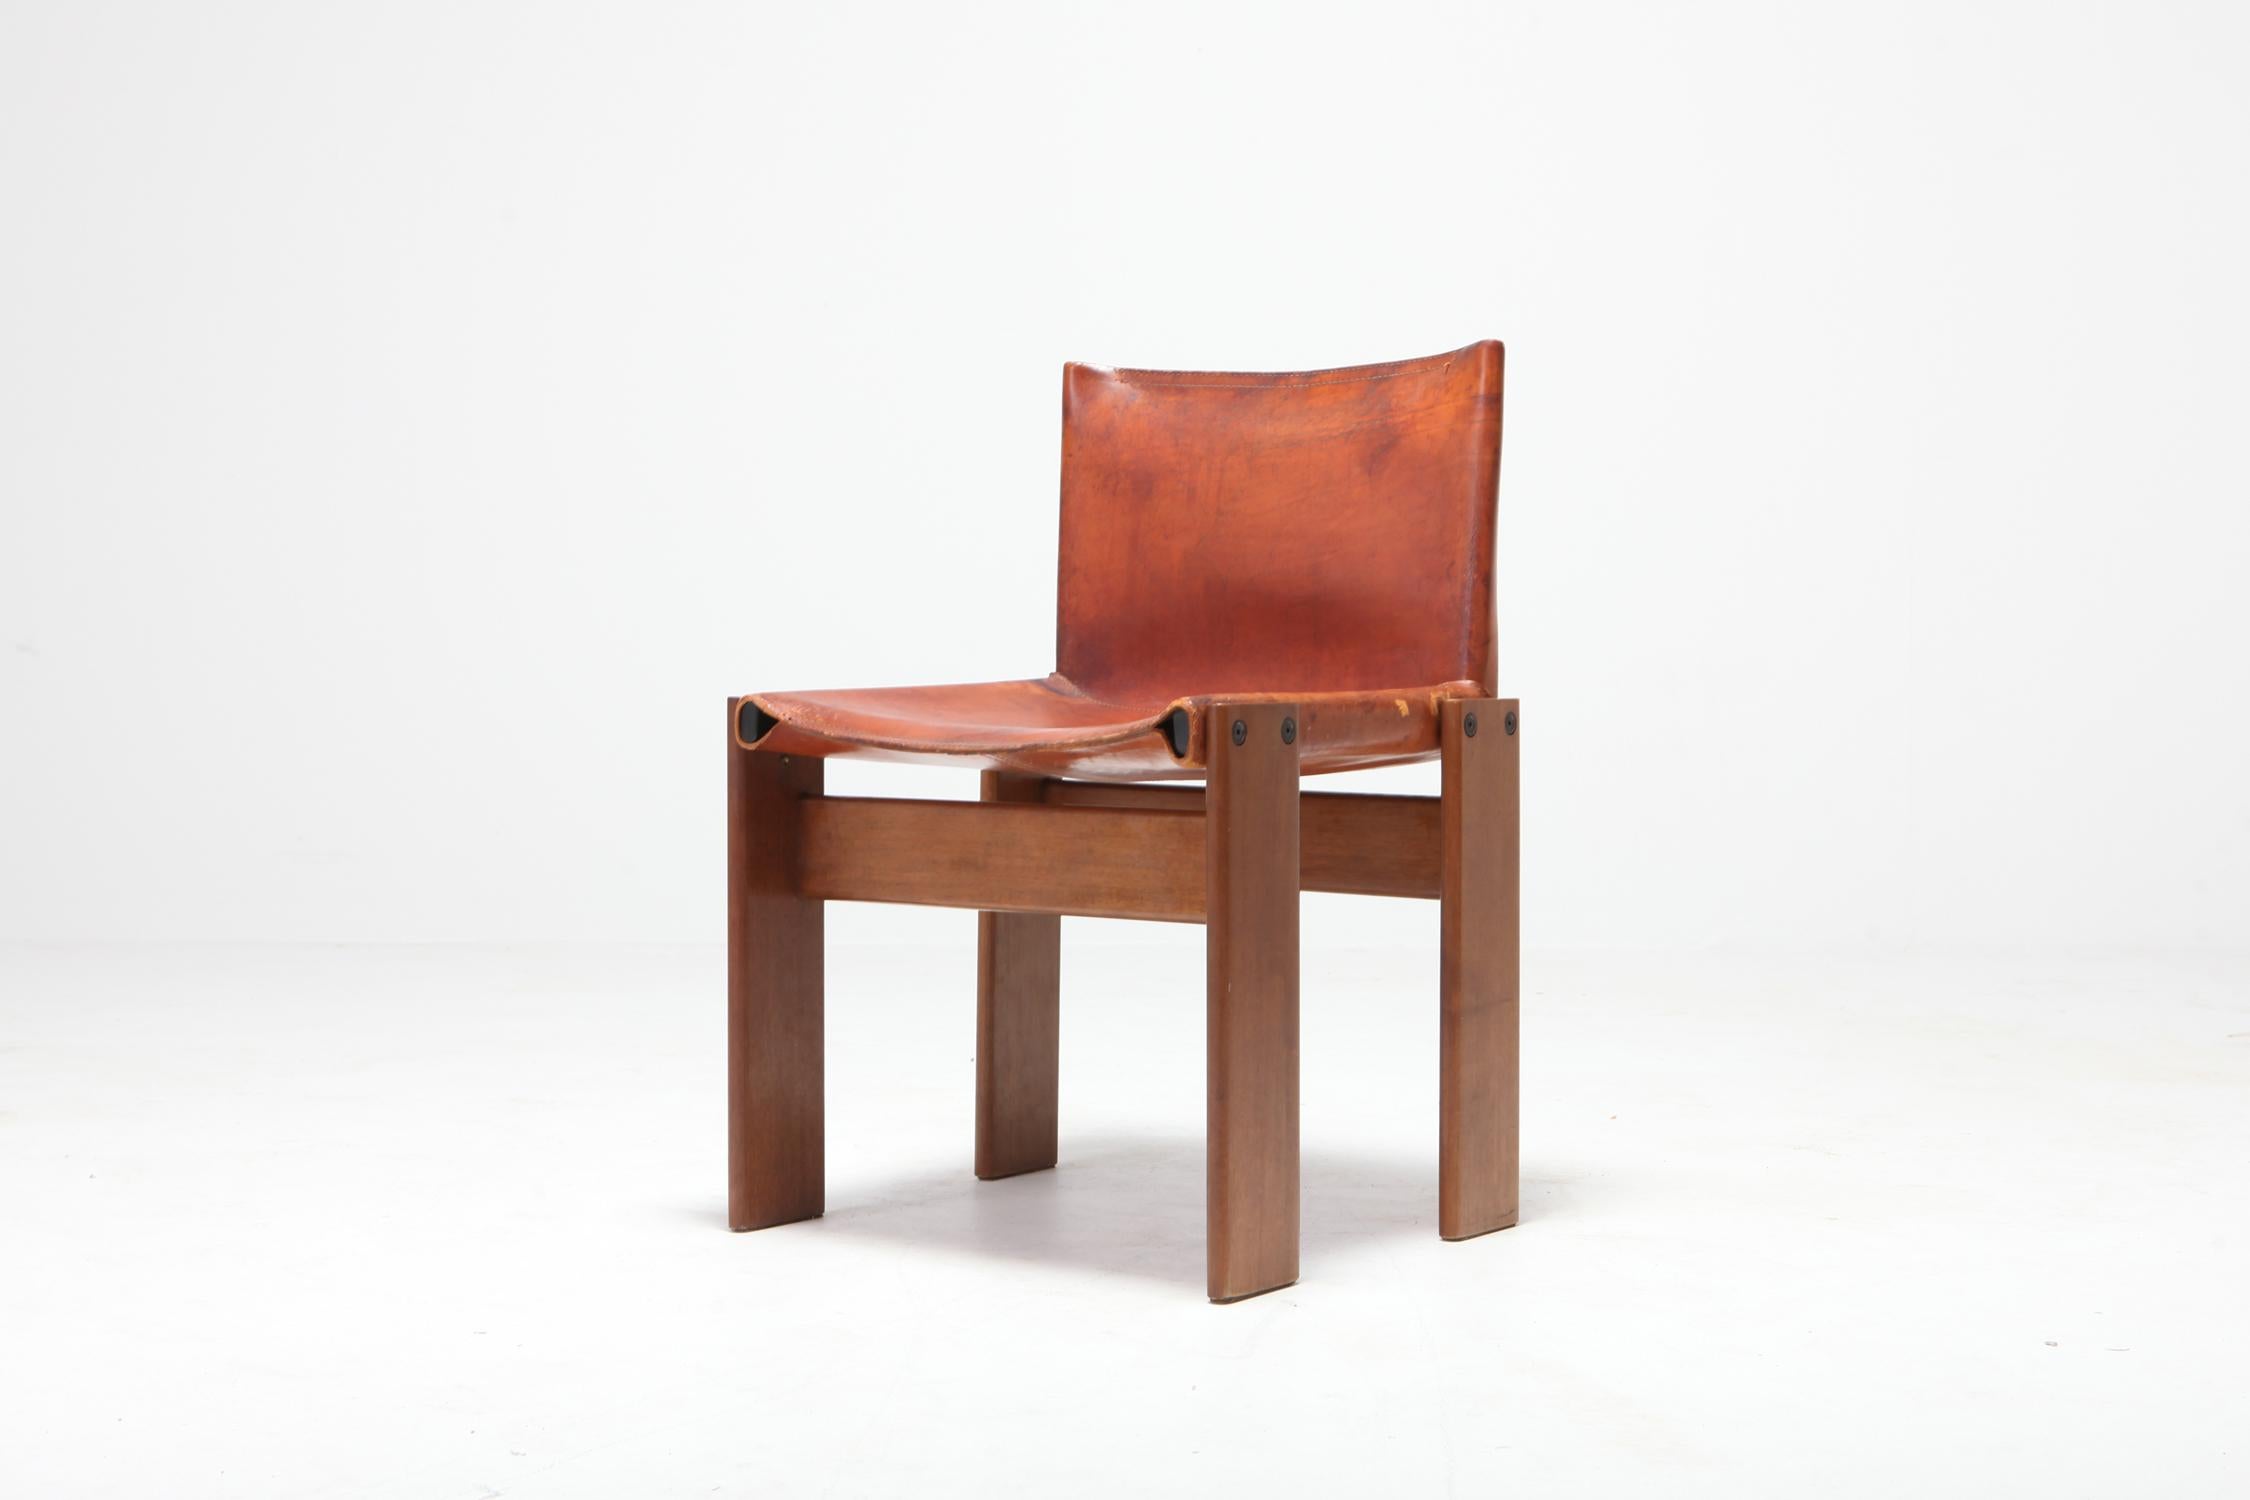 European Scarpa 'Monk' Chairs in Patinated Cognac Leather, Set of Four